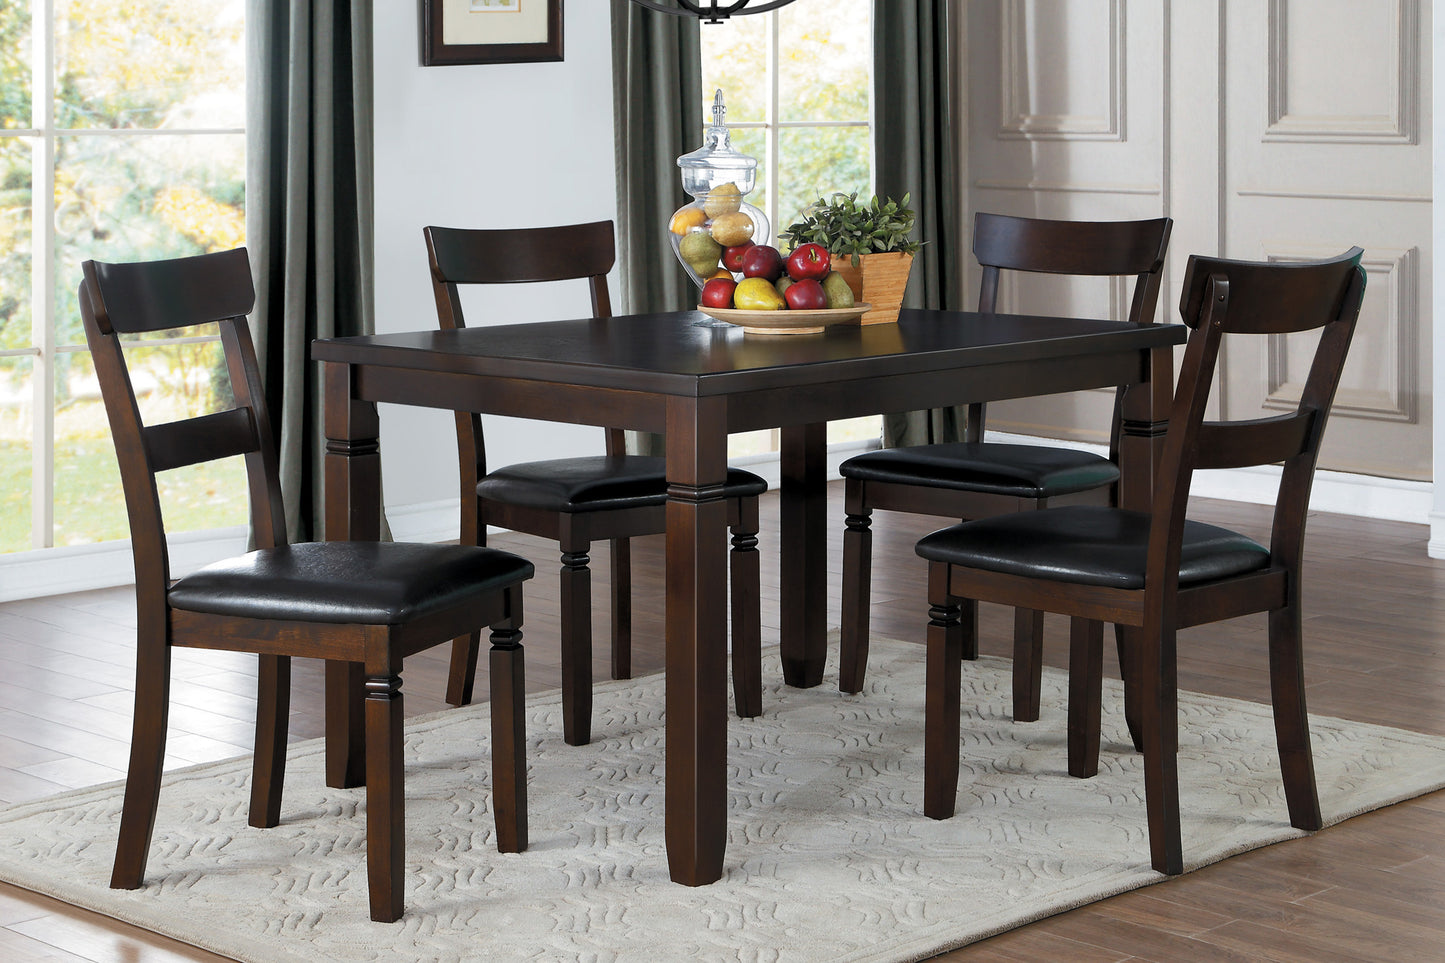 Oklahoma 5PC Dining Set - Table & 4 Chairs BROWN only